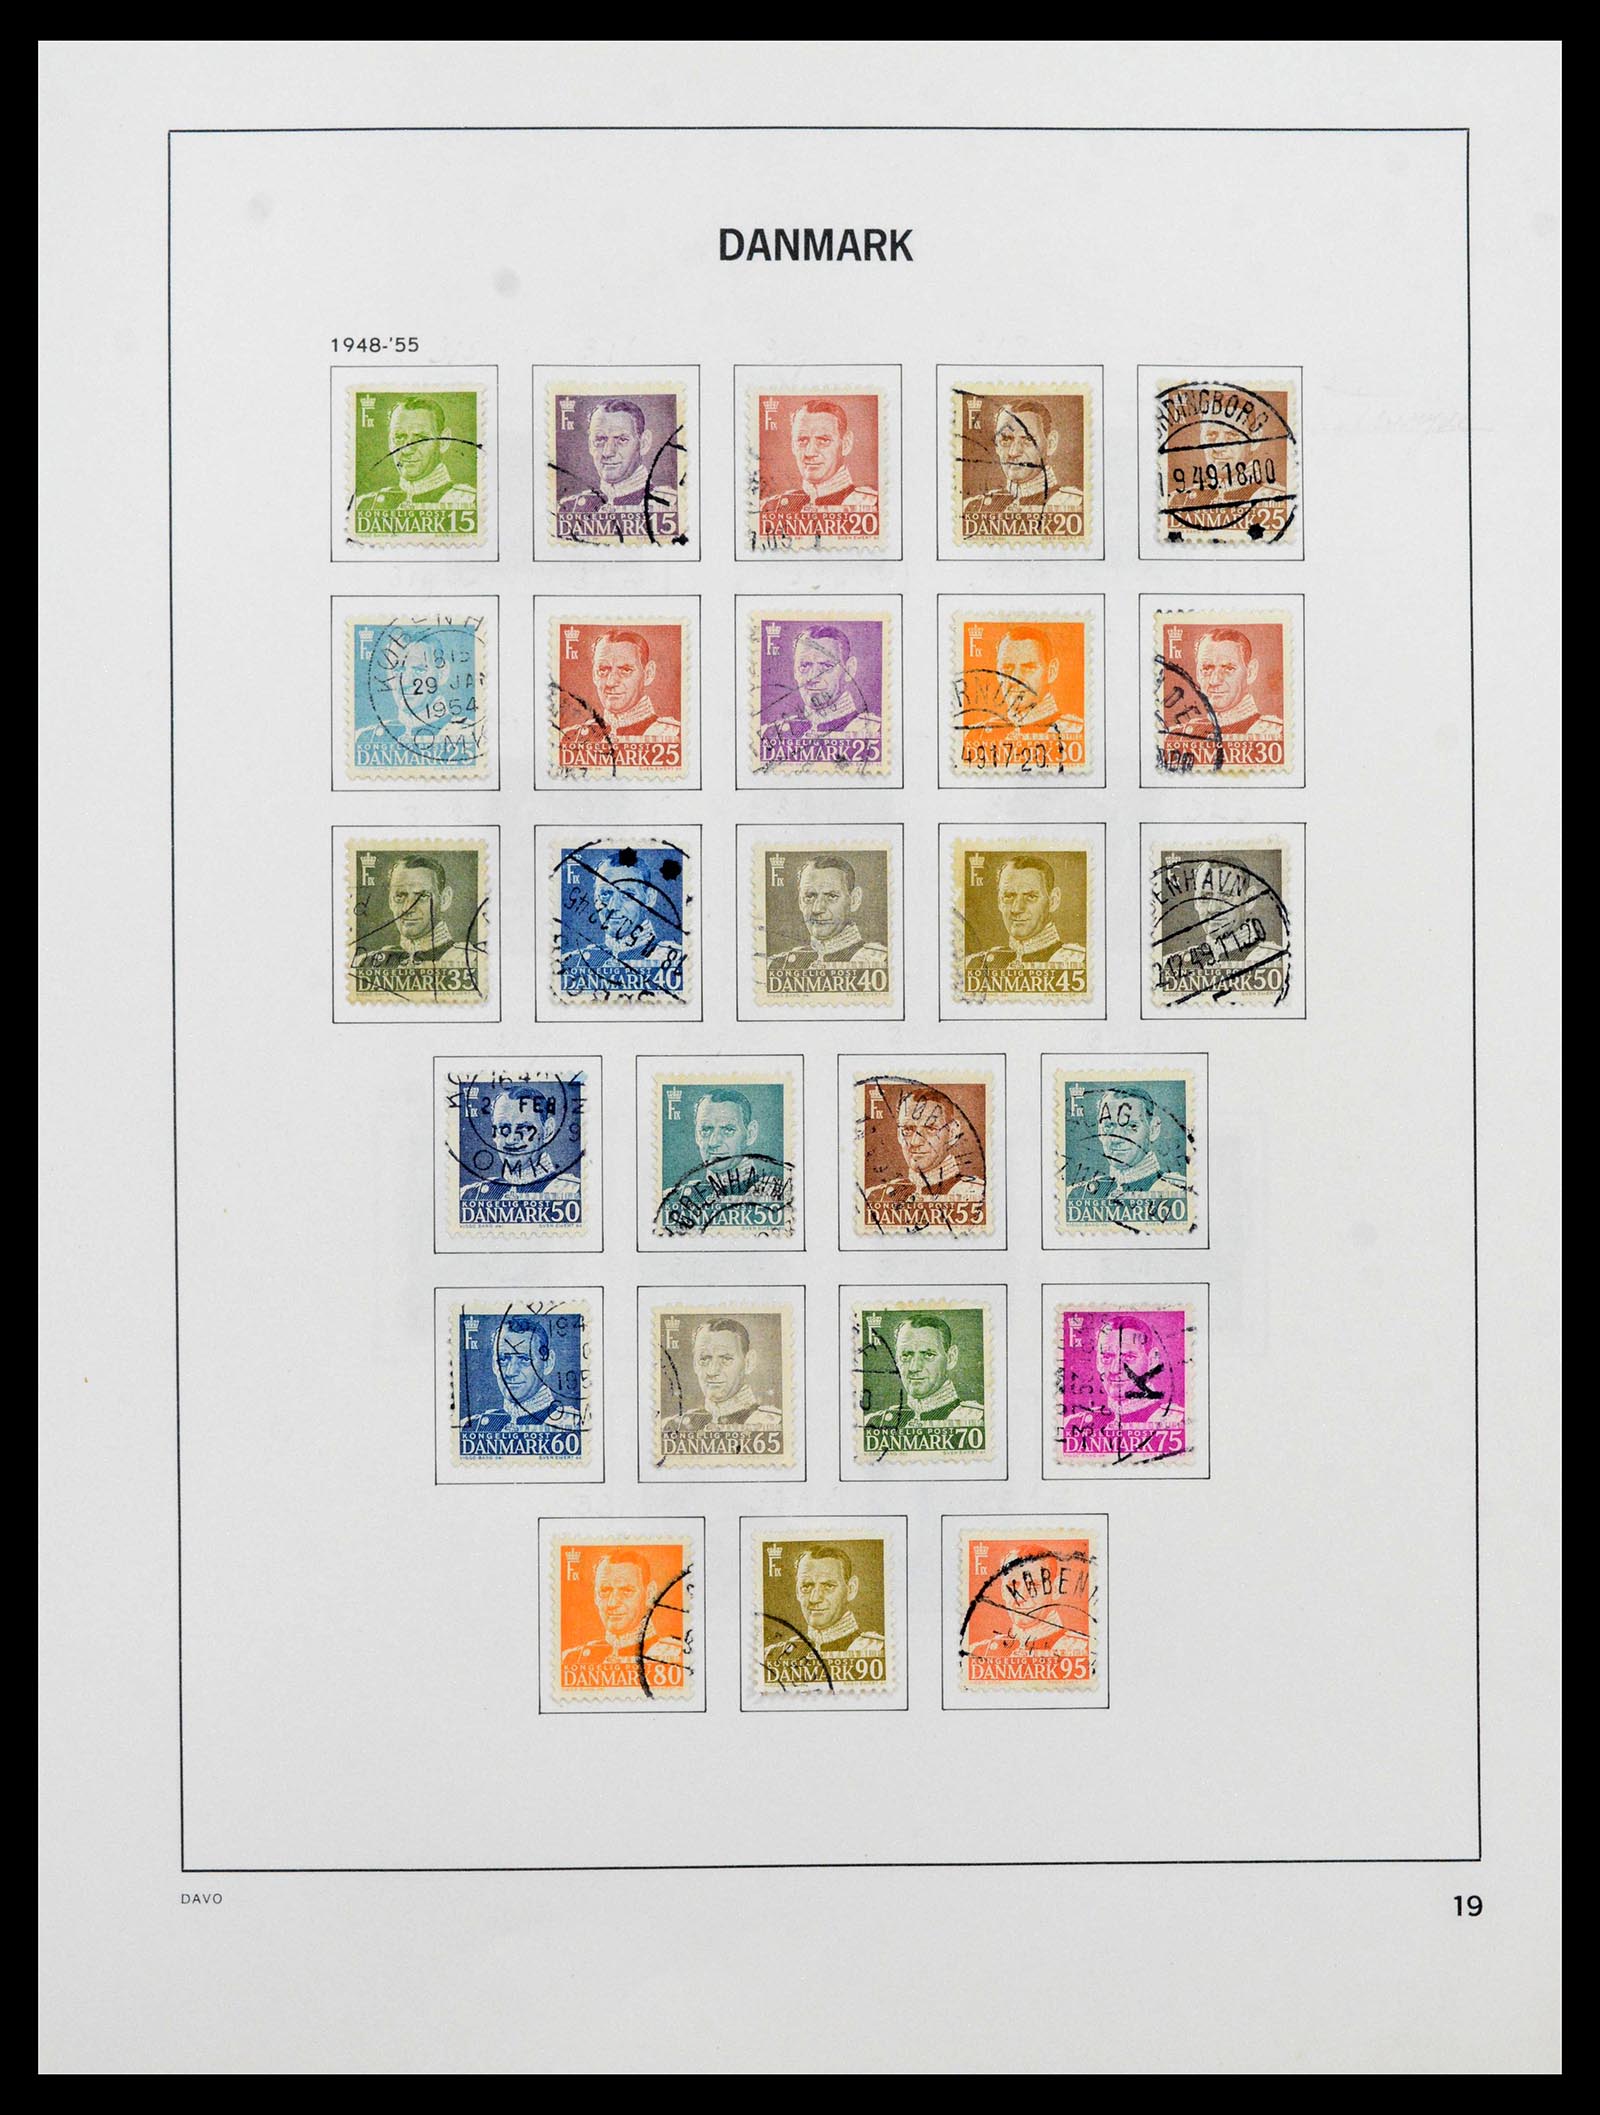 39428 0021 - Stamp collection 39428 Denmark 1851-2019.